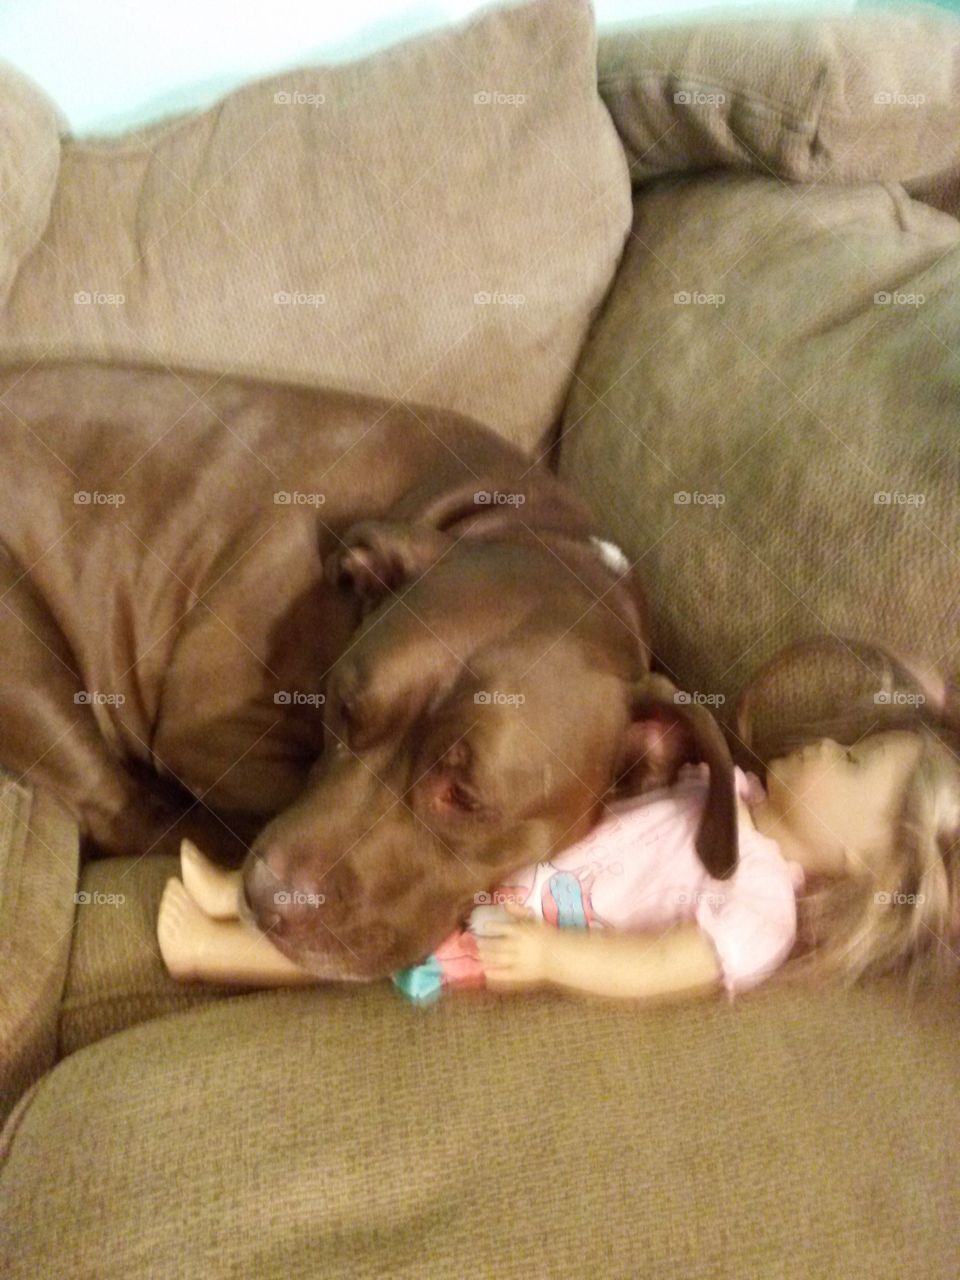 cuddle puppy. large brown dog sleeping on an American Girl doll